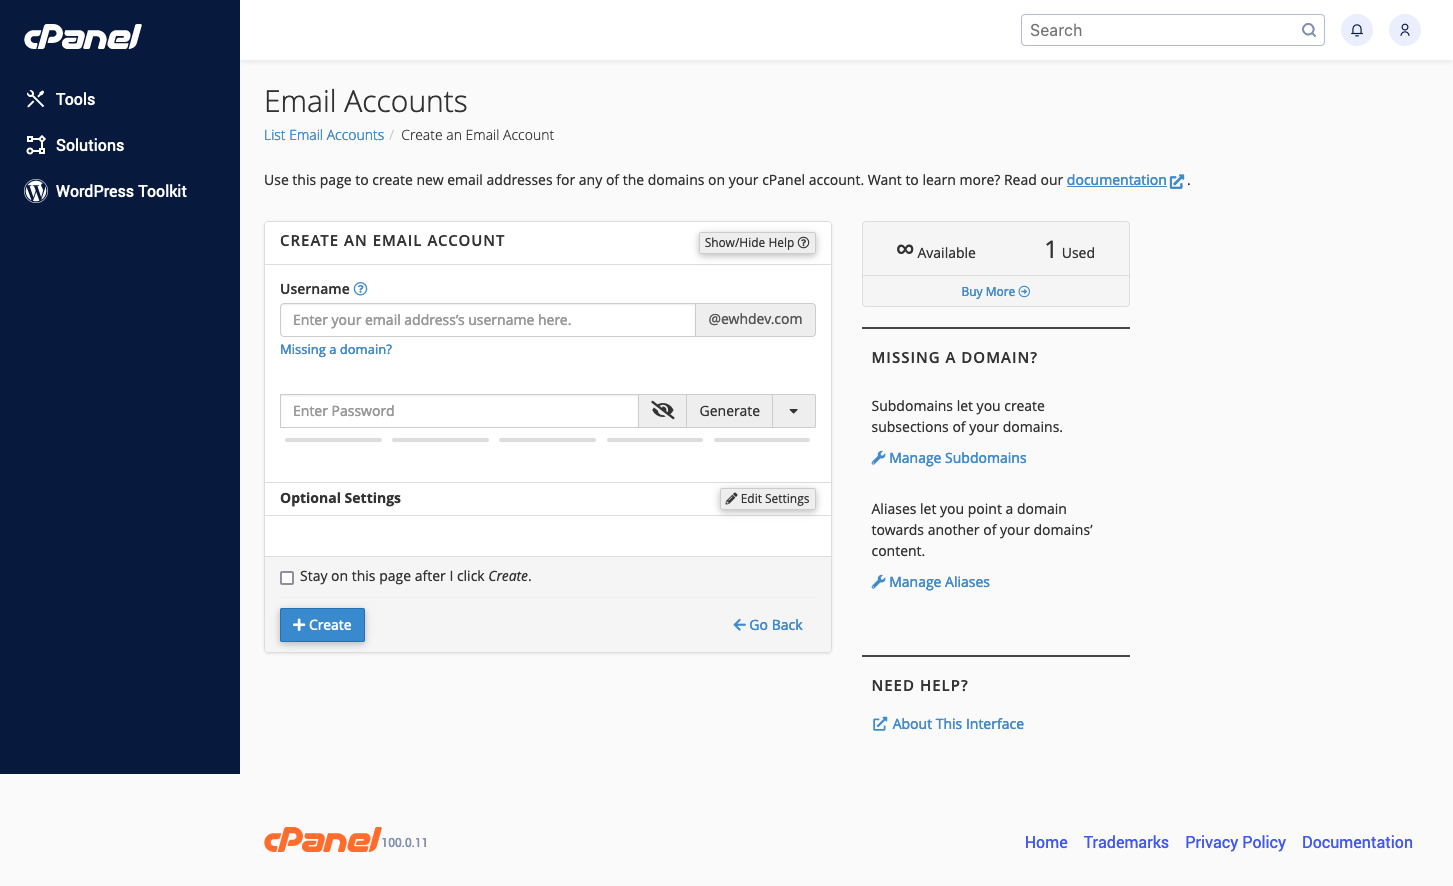 Create an Email Account